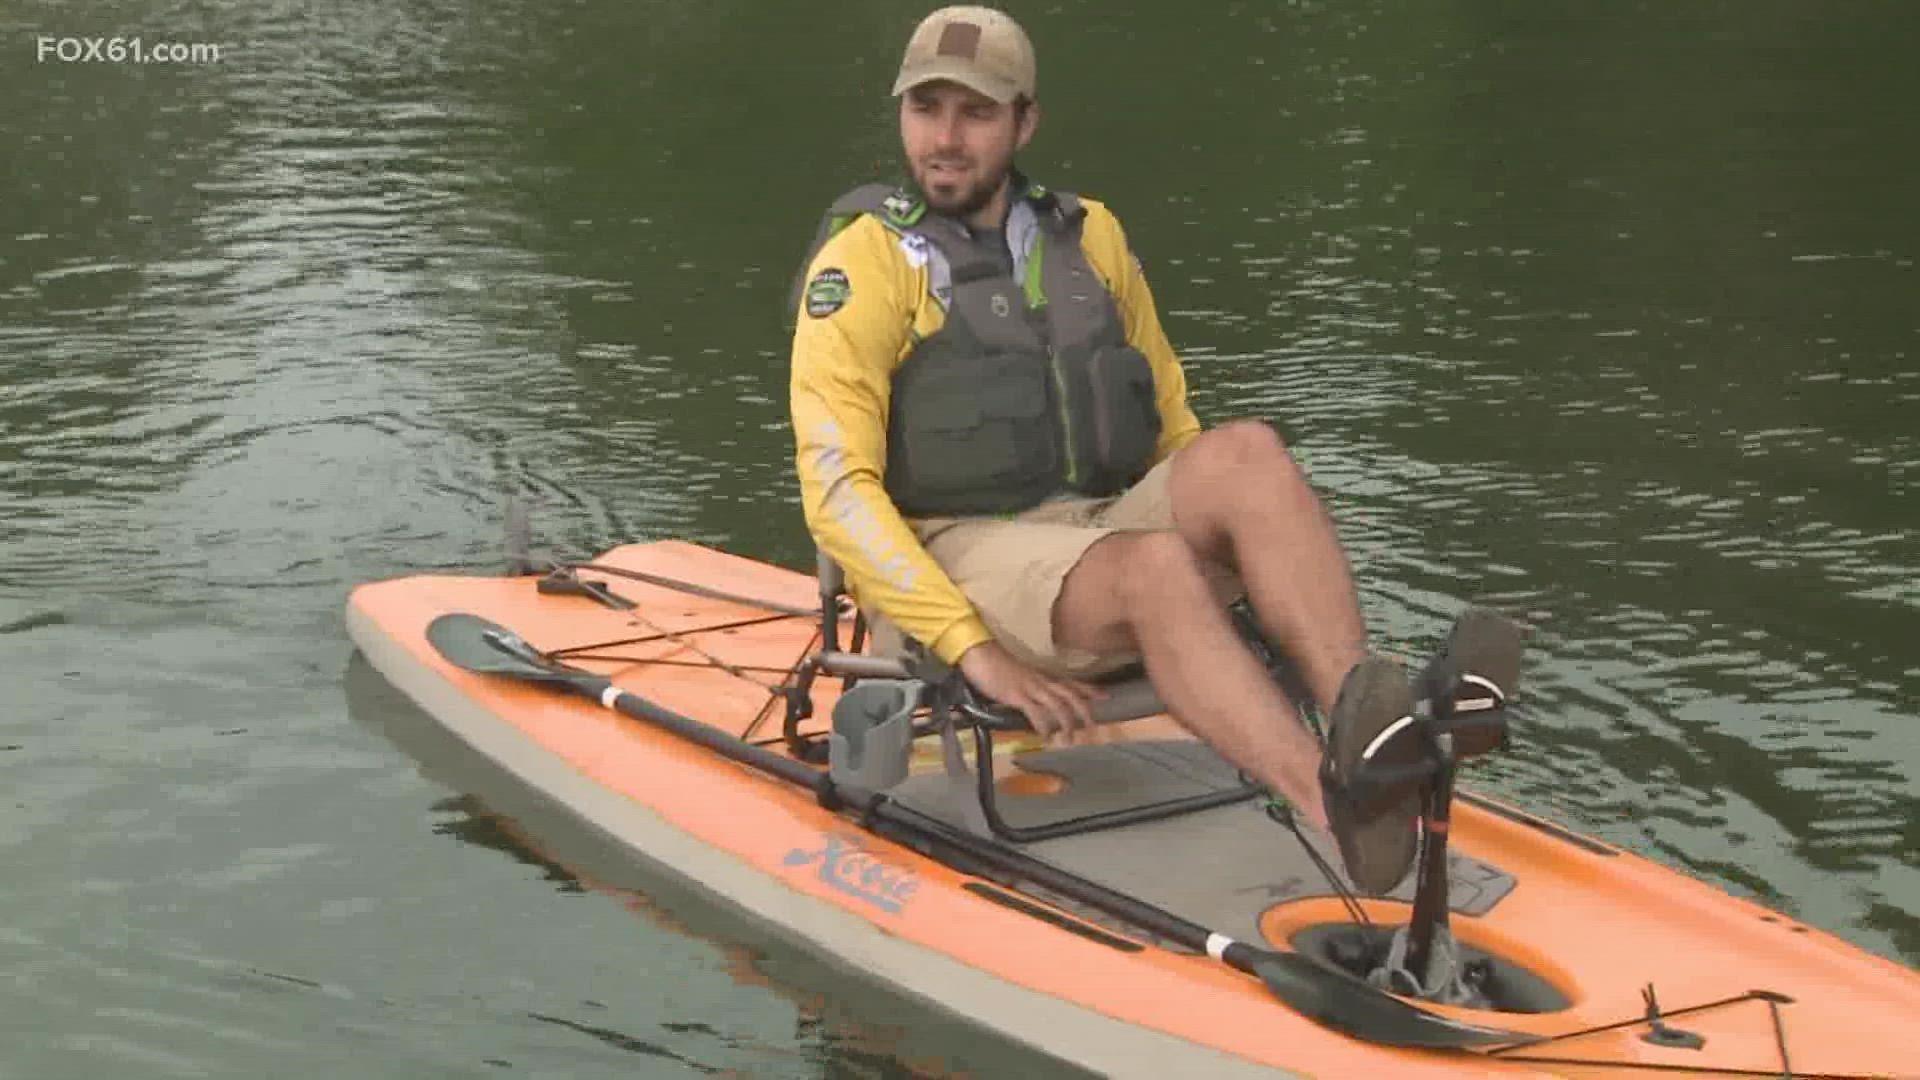 This time of year, it is mandated in Connecticut to wear a life jacket.